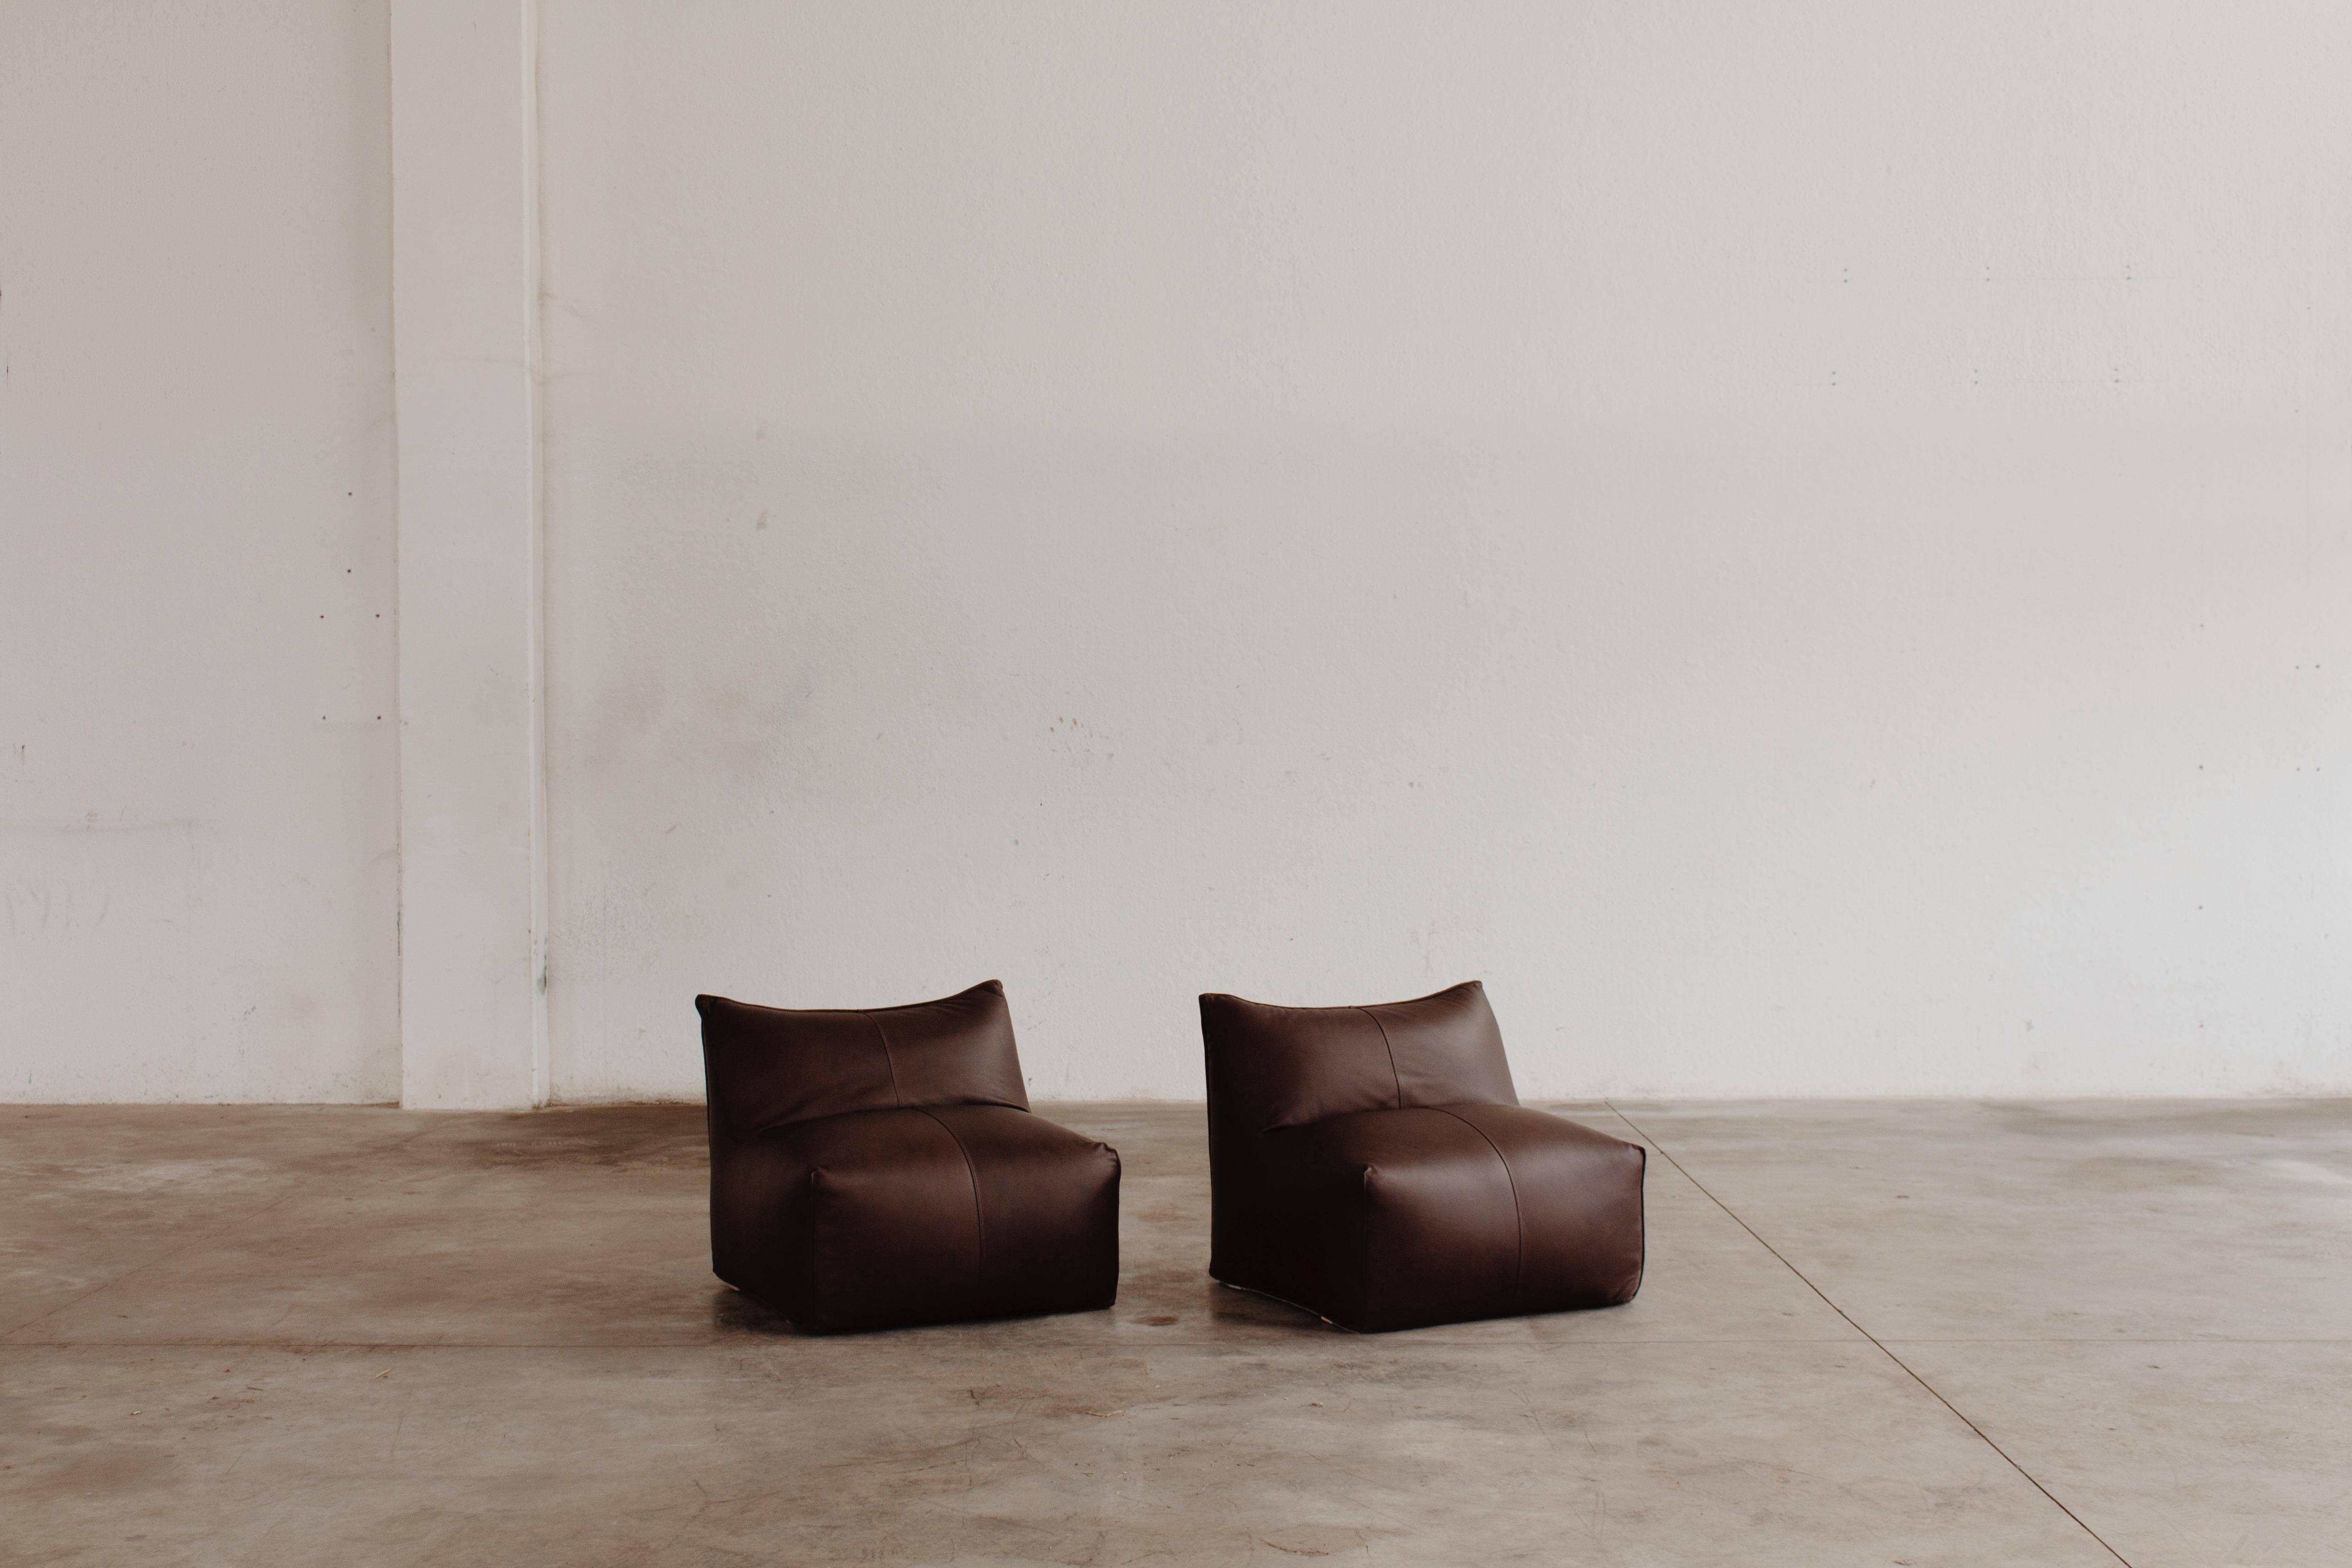 Mario Bellini “Le Bambole” armchairs for B&B Italia, brown leather and foam, Italy, 1970s, set of two.

The search for a new shape for upholstered furniture: all parts are shaped like a large soft cushion. If we take apart 